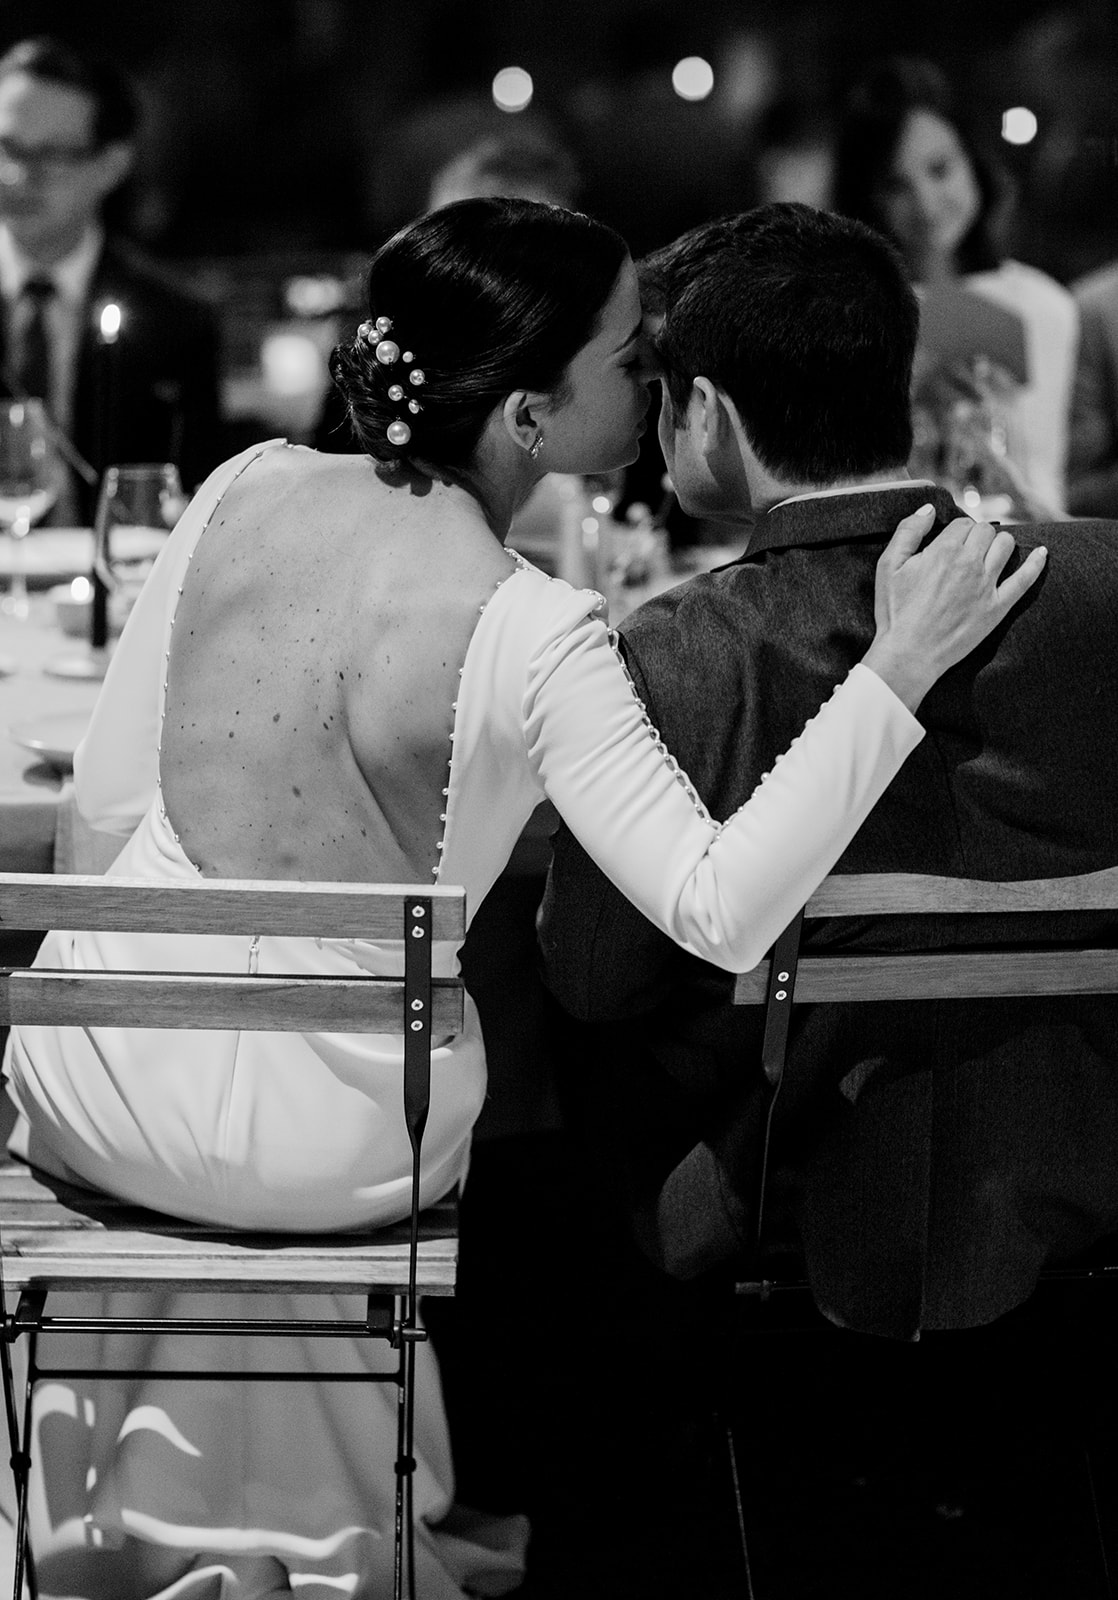 romantic bride and groom photo captured at their intimate wedding reception